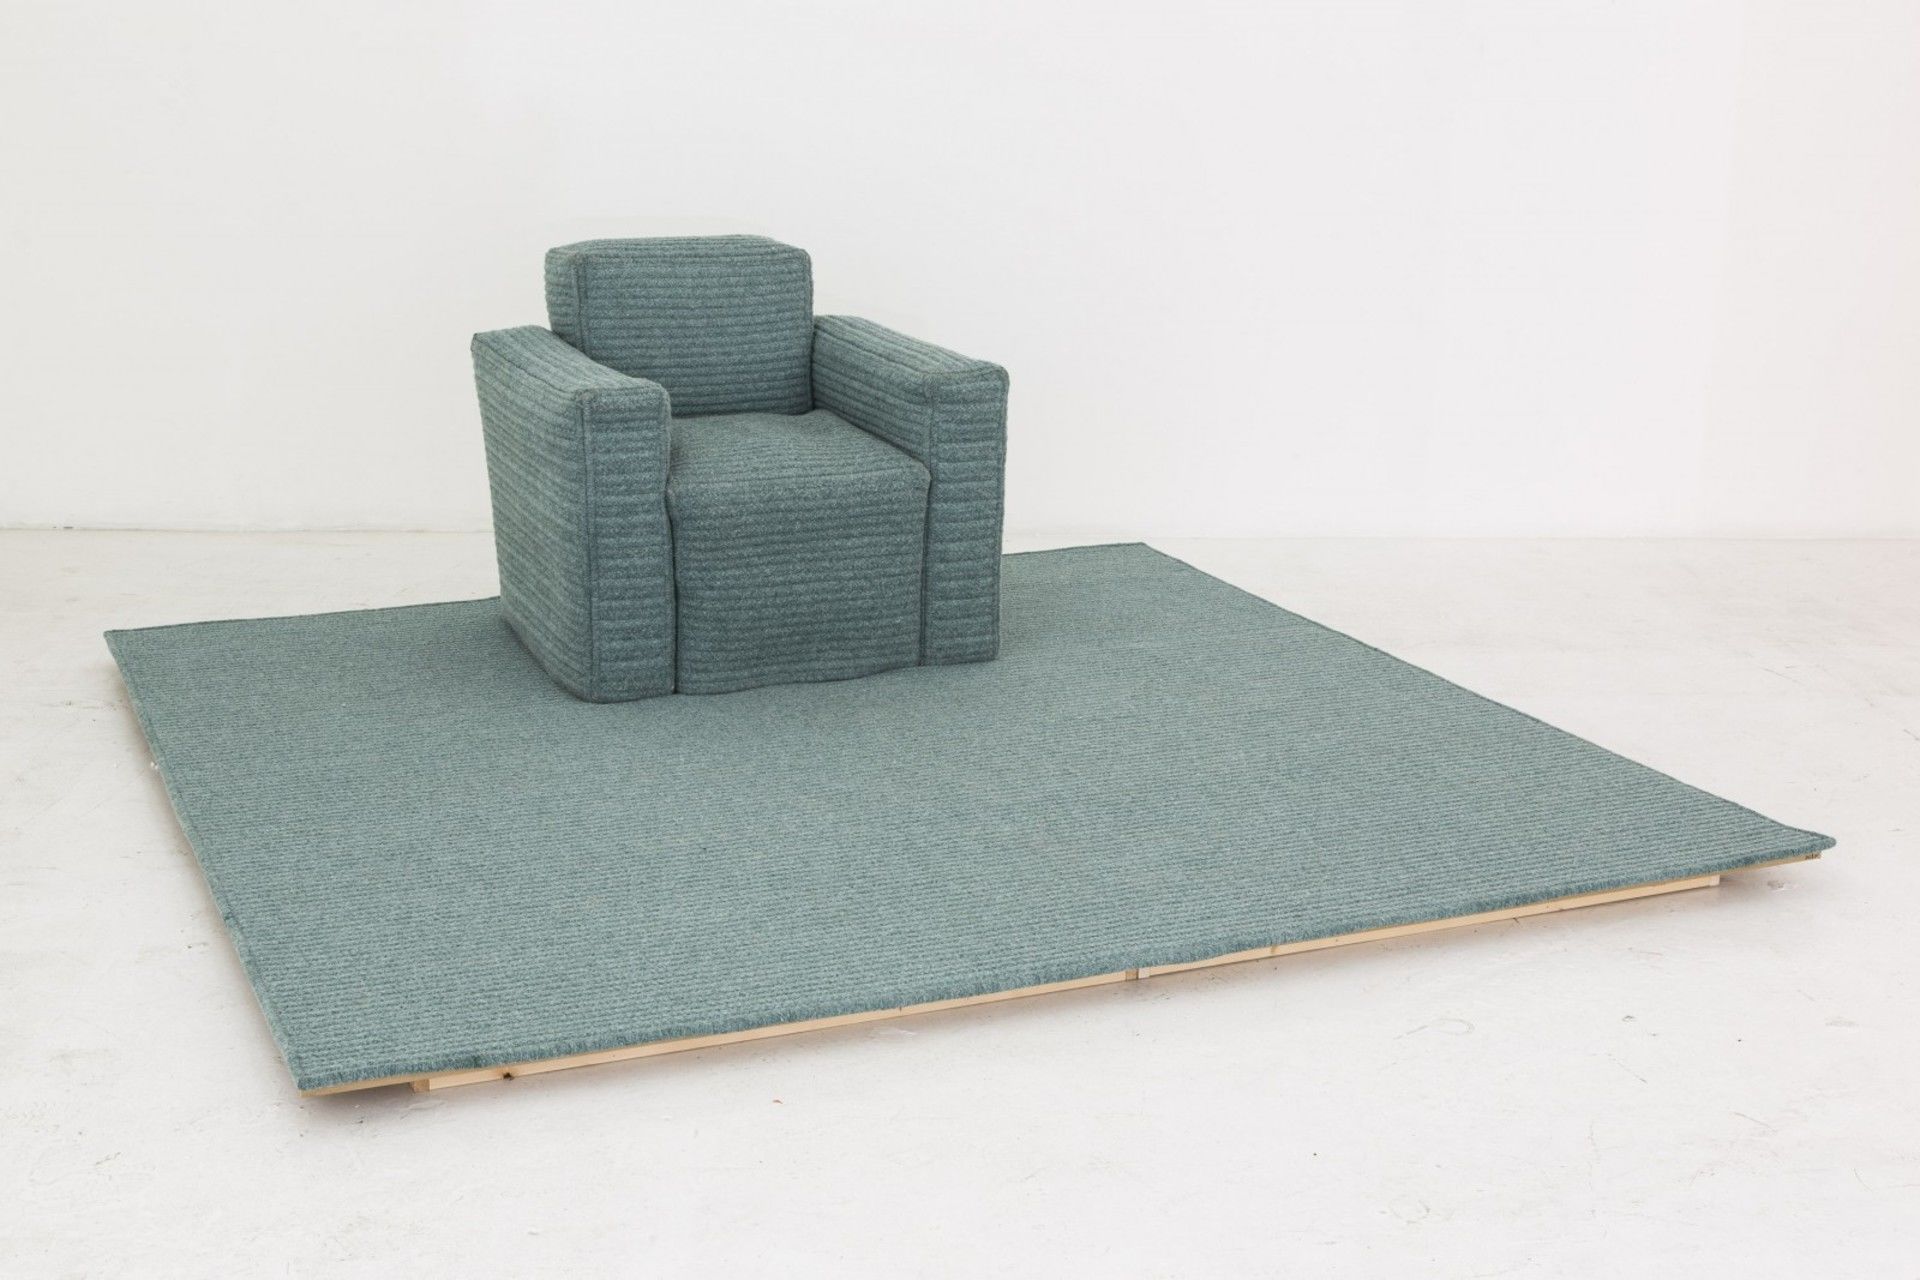 Chair Rug by Katie Stout for exhibition Docile/Domicile/Dandy at Gallery Diet, Miami 2015